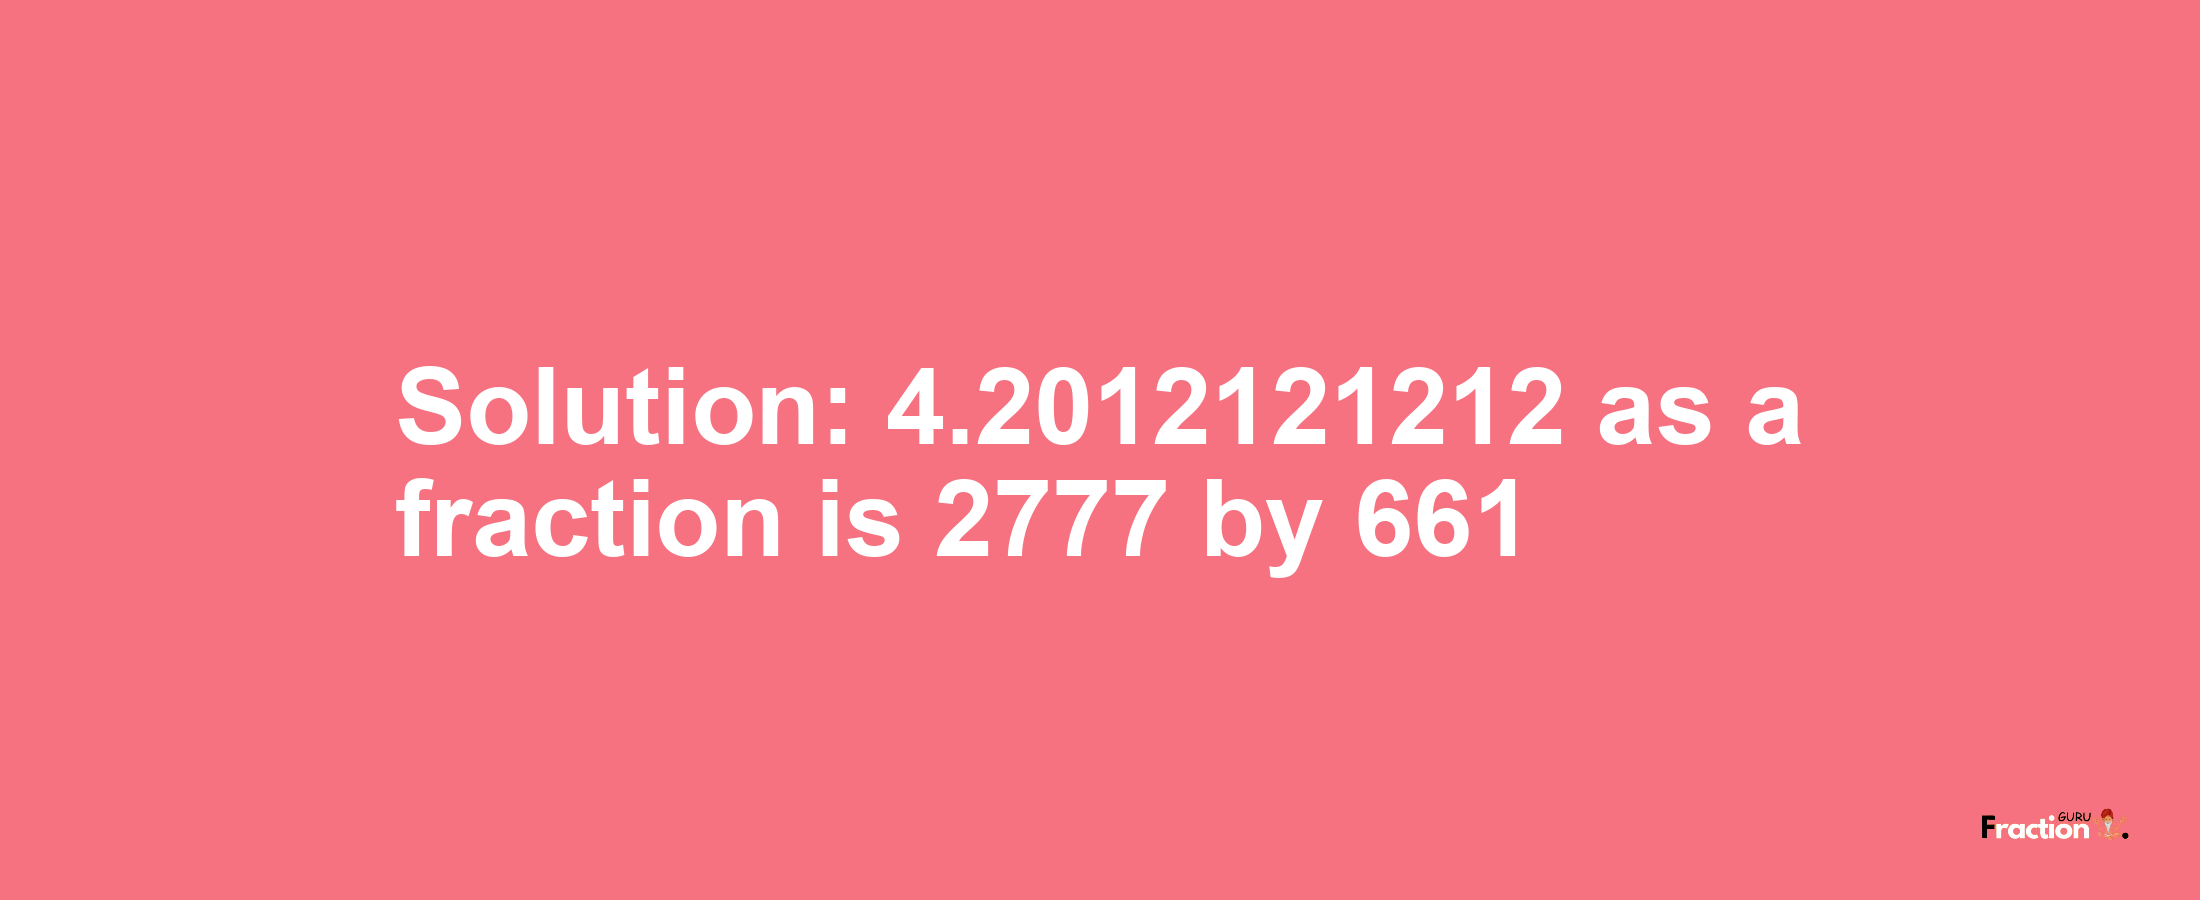 Solution:4.2012121212 as a fraction is 2777/661